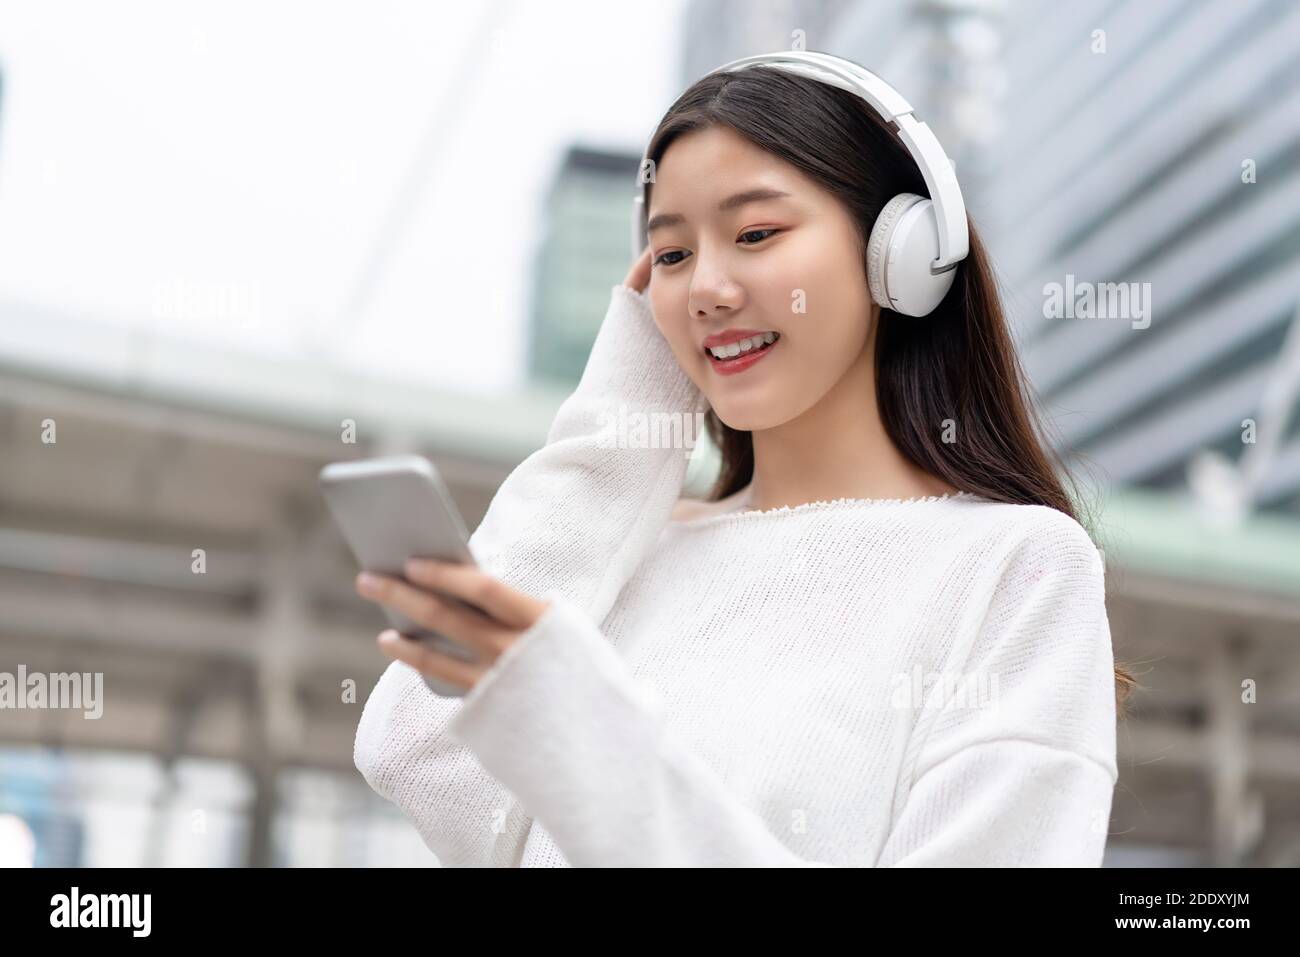 Happy smiling Asian girl wearing headphones and looking at smartphone while listening to streaming music against city building background Stock Photo